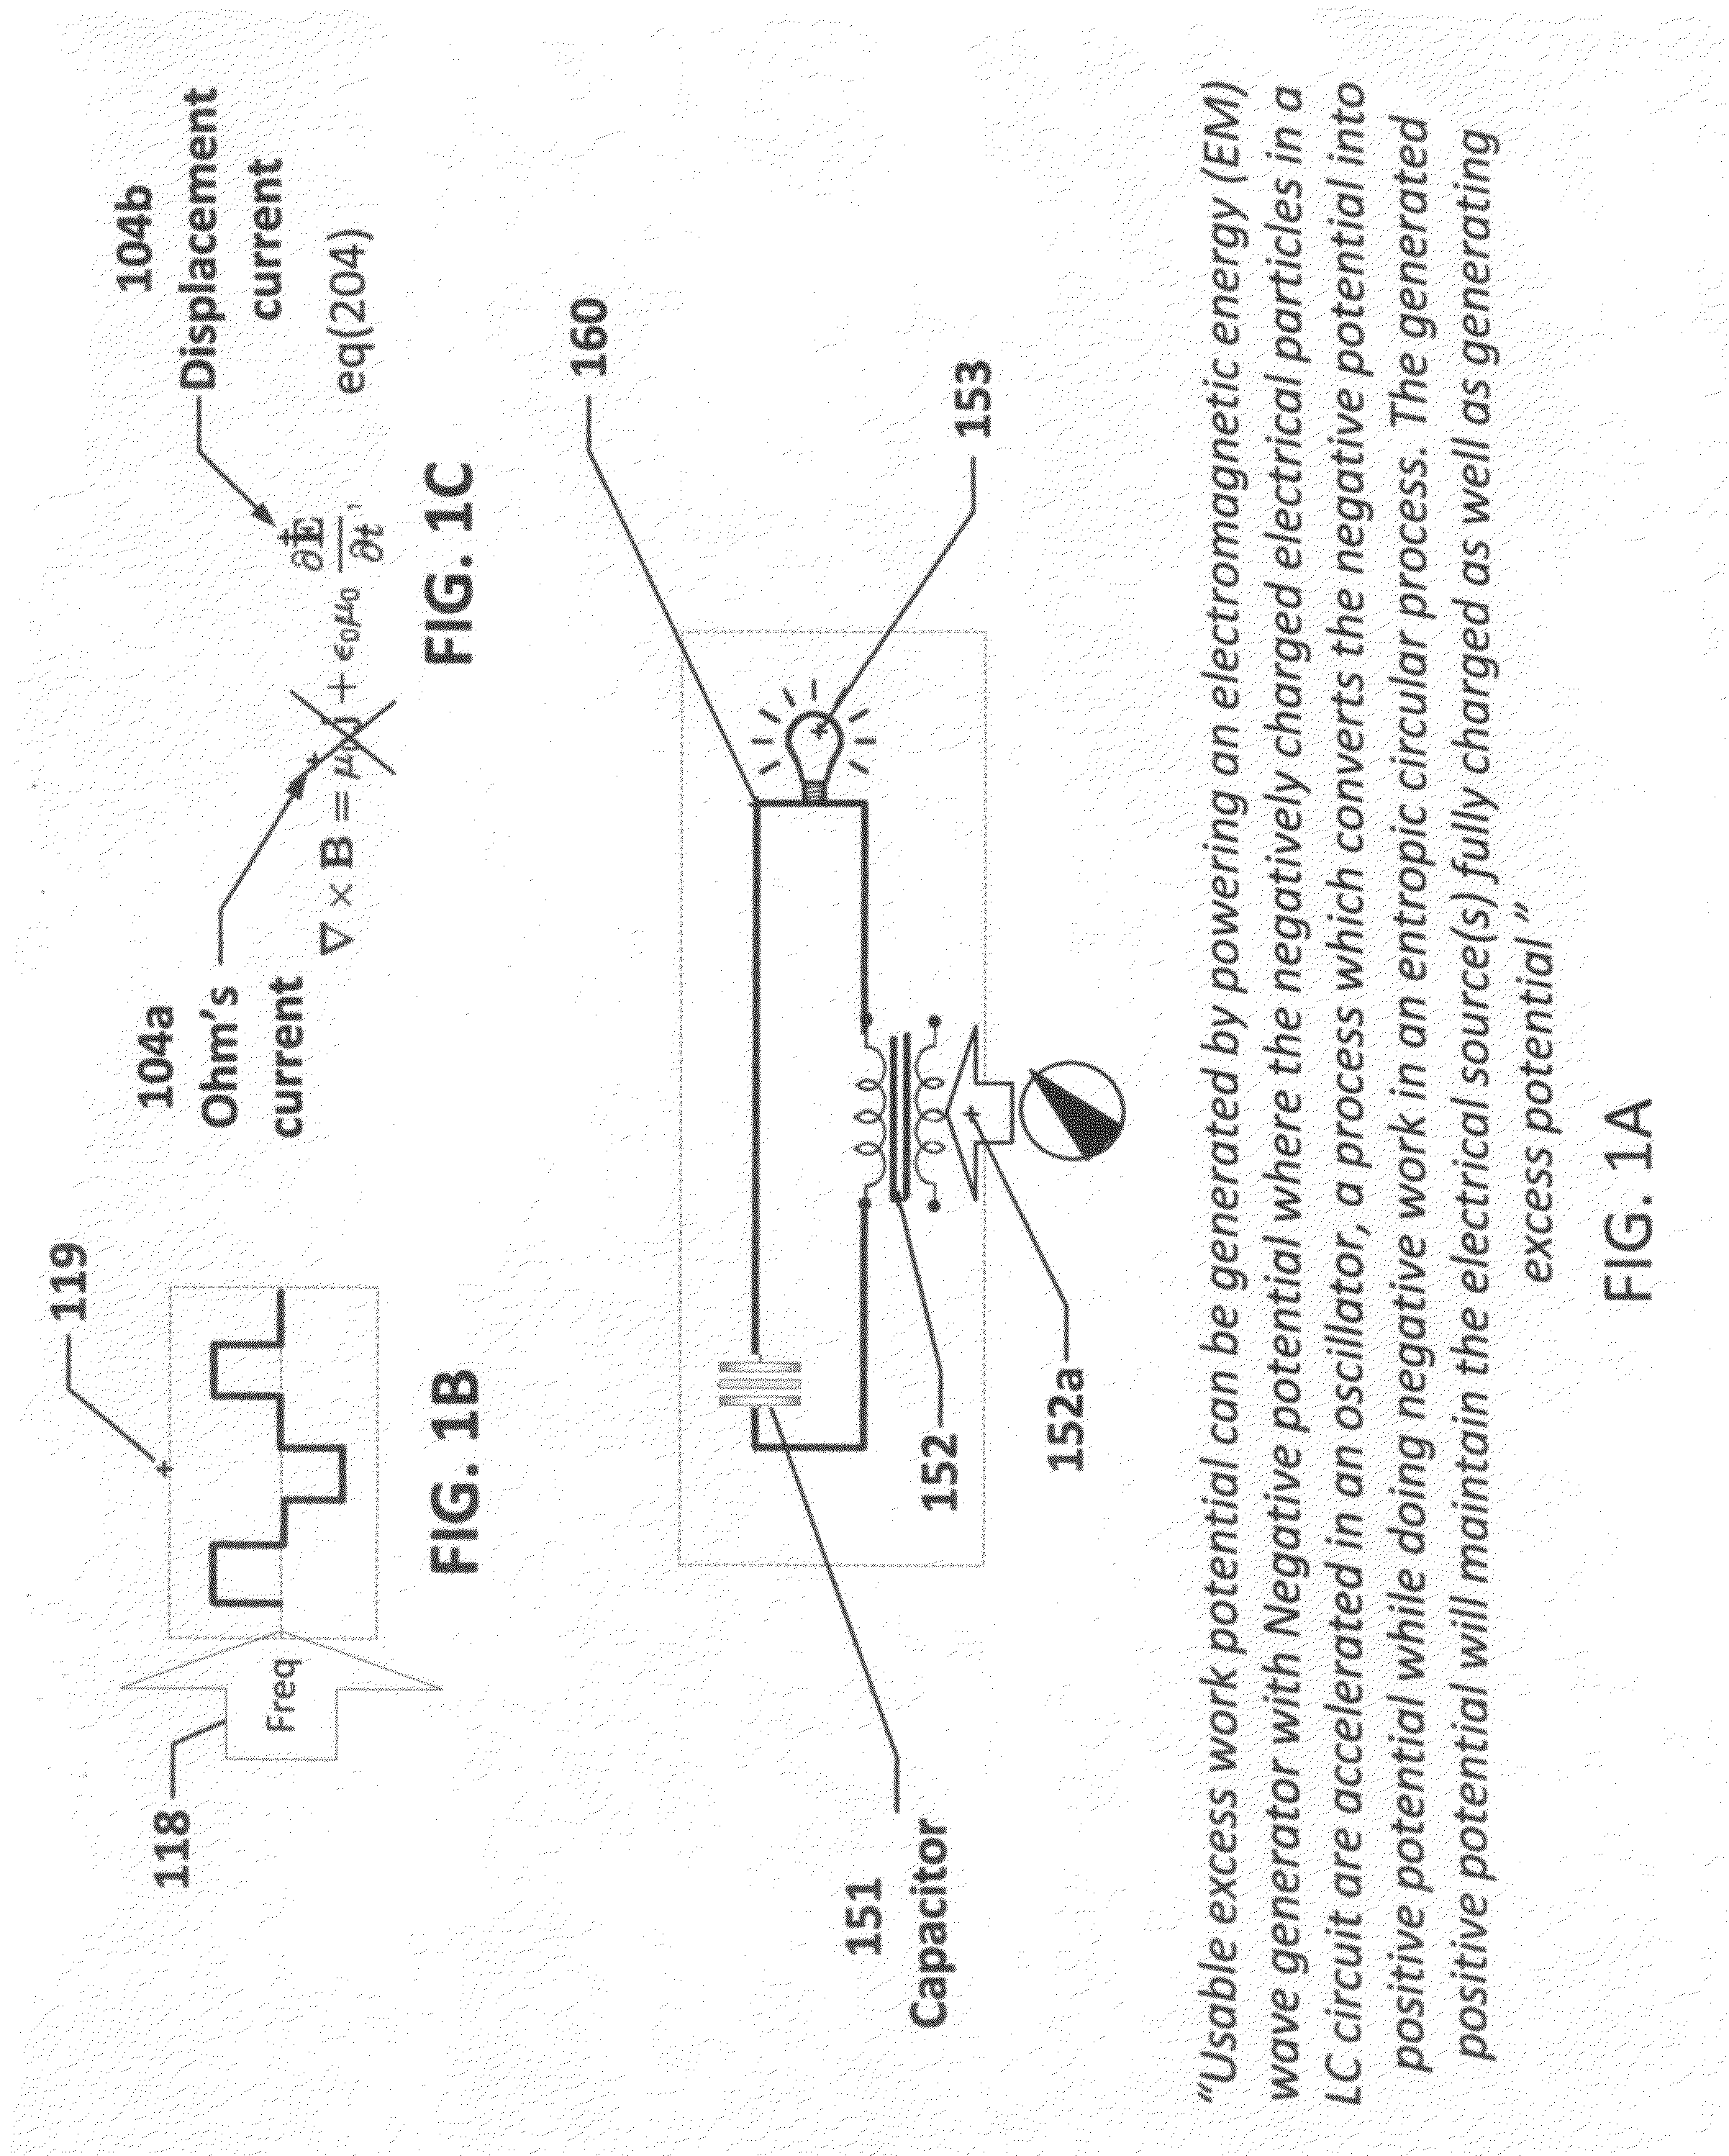 Negentropic method and apparatus to generate usable work while reconditioning the energy source using electromagnetic energy waves